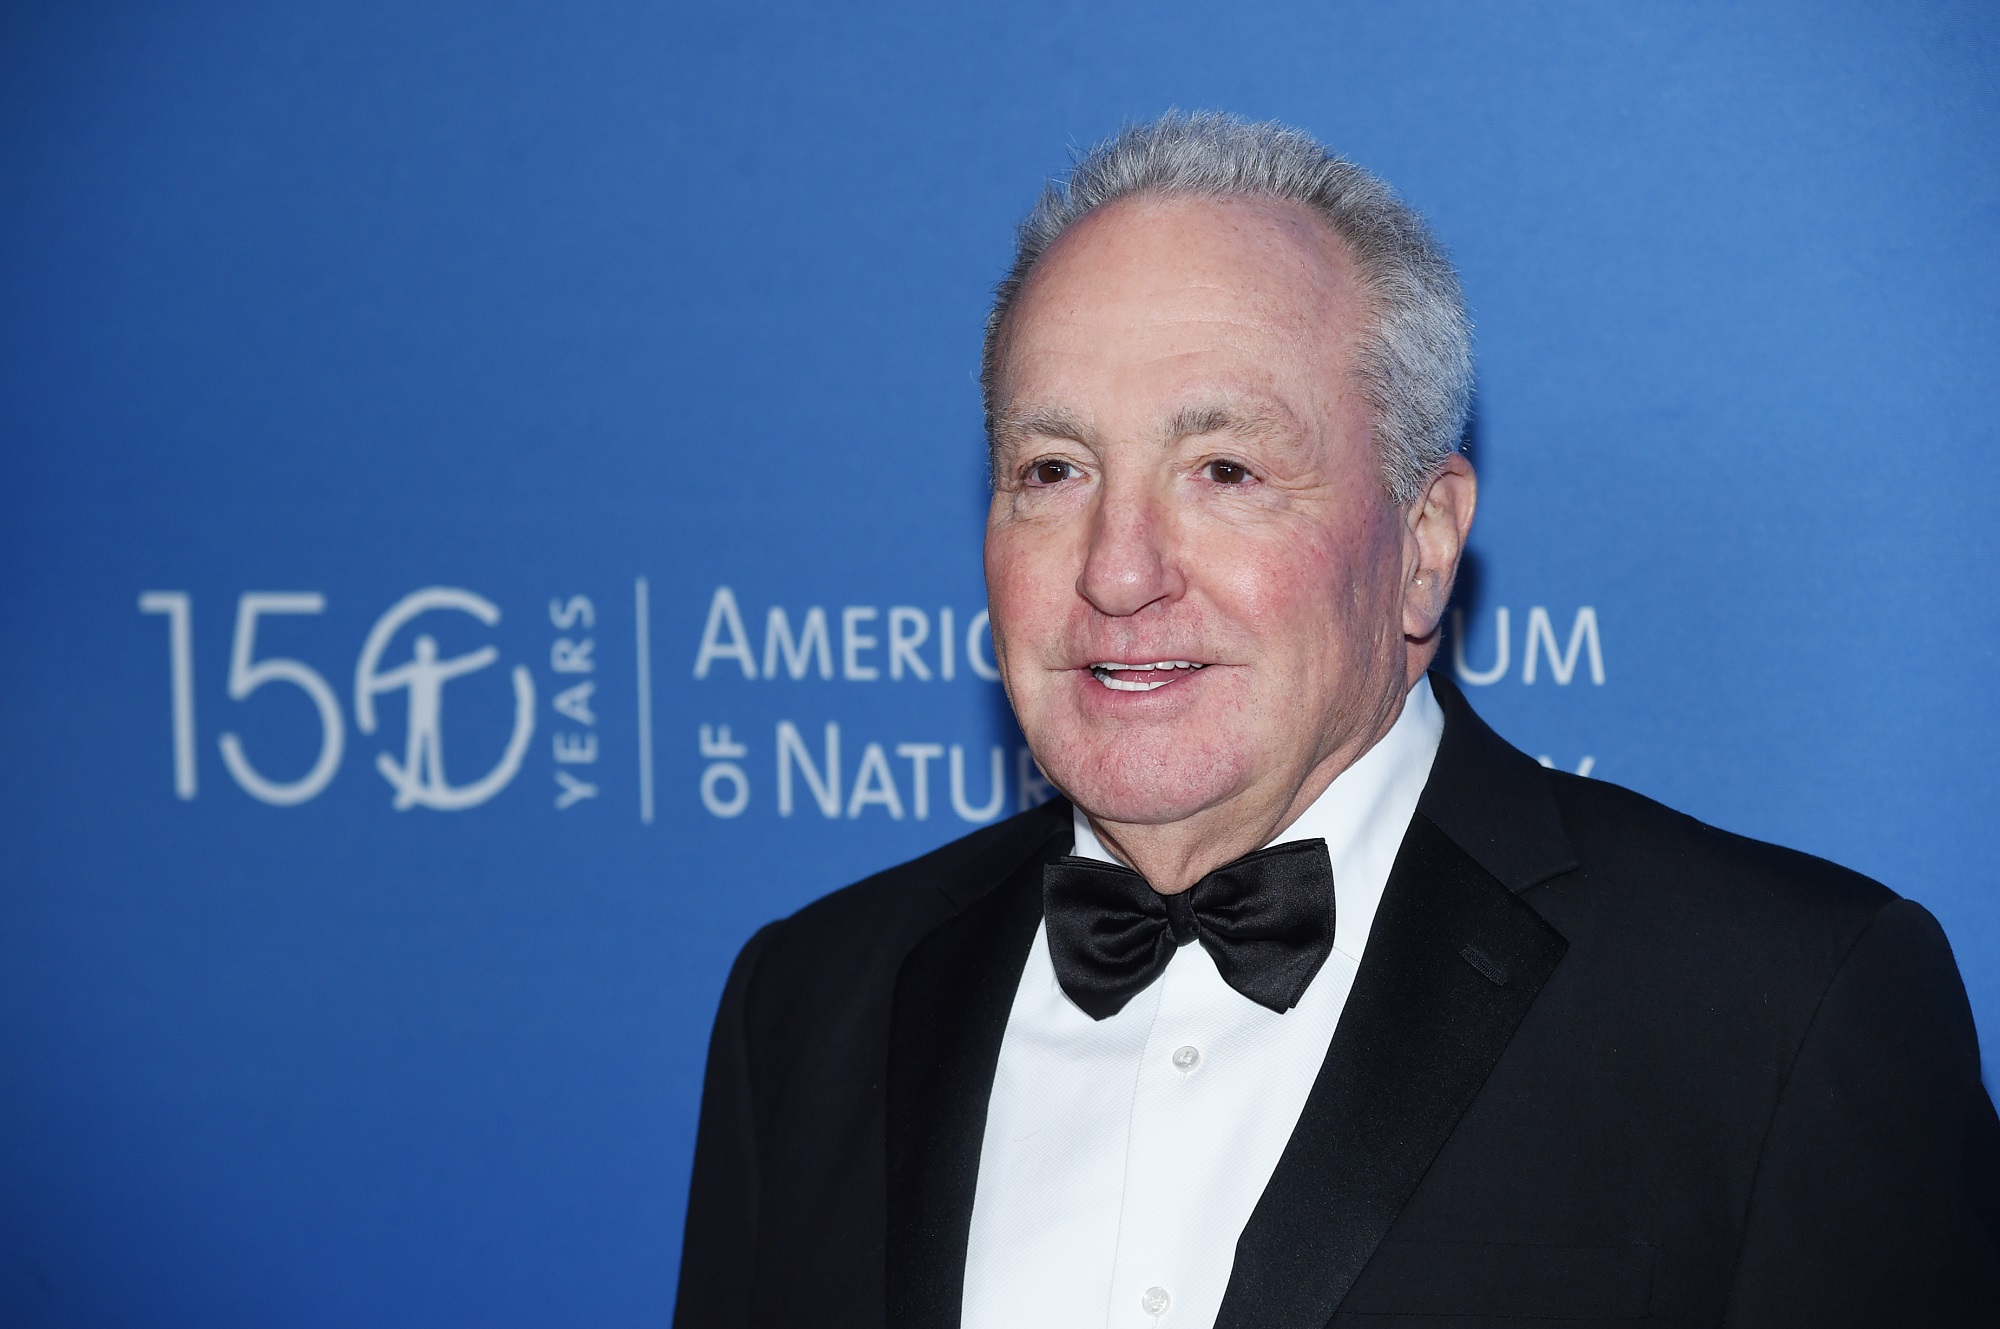 Lorne Michaels invited Elon Musk to Saturday Night Live on May 8 